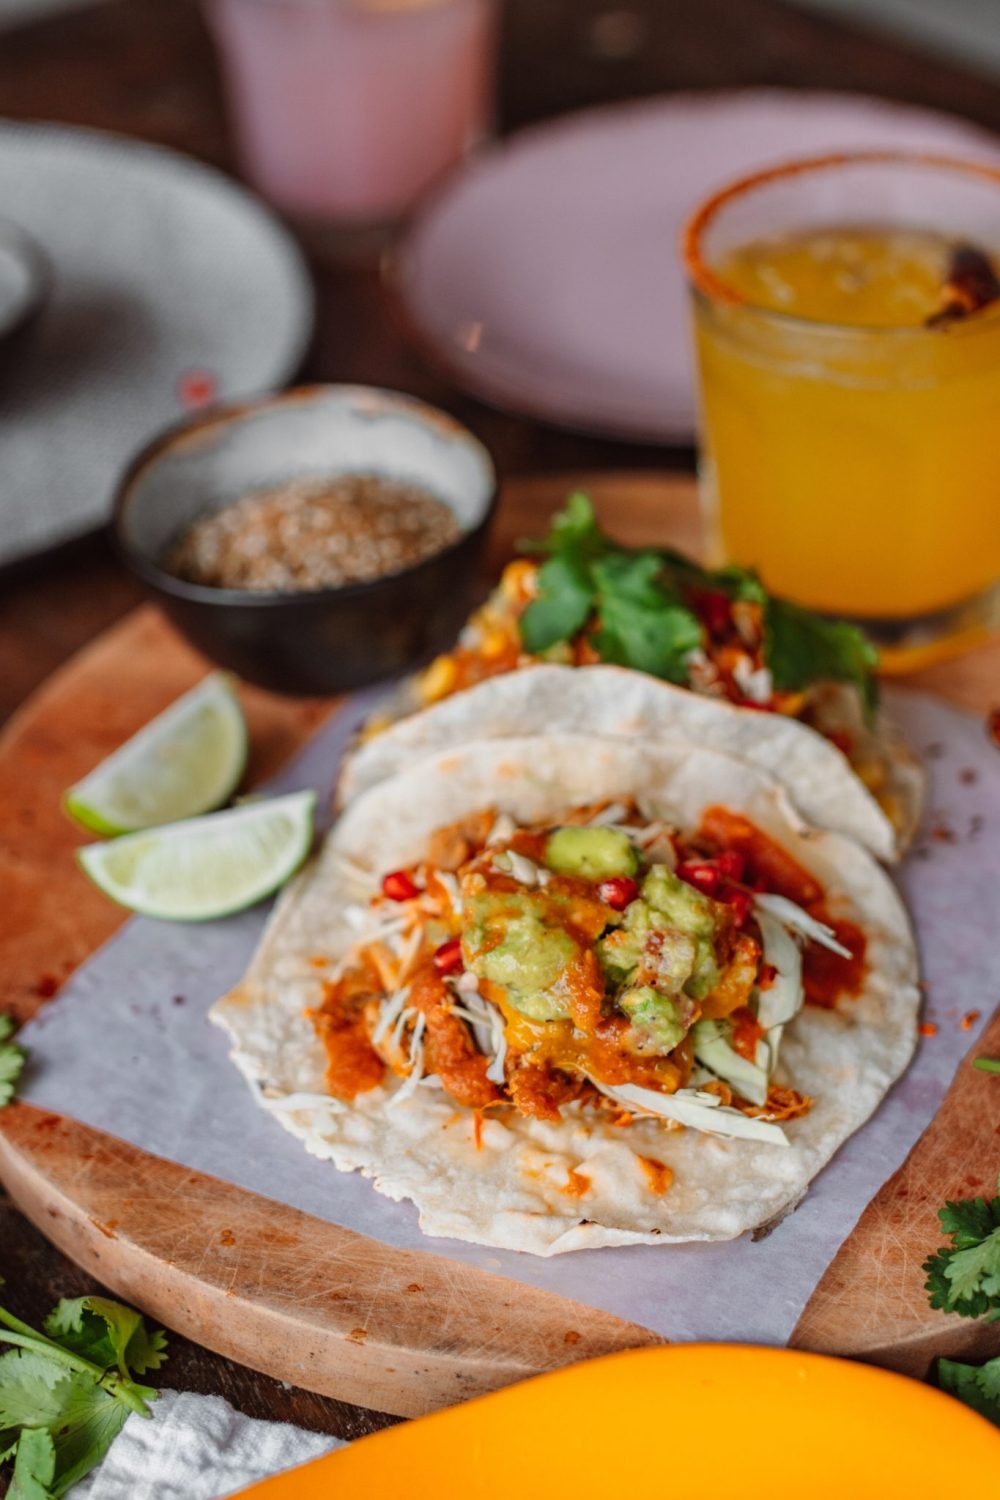 Top 5 Tasty Mexican Meals to Try